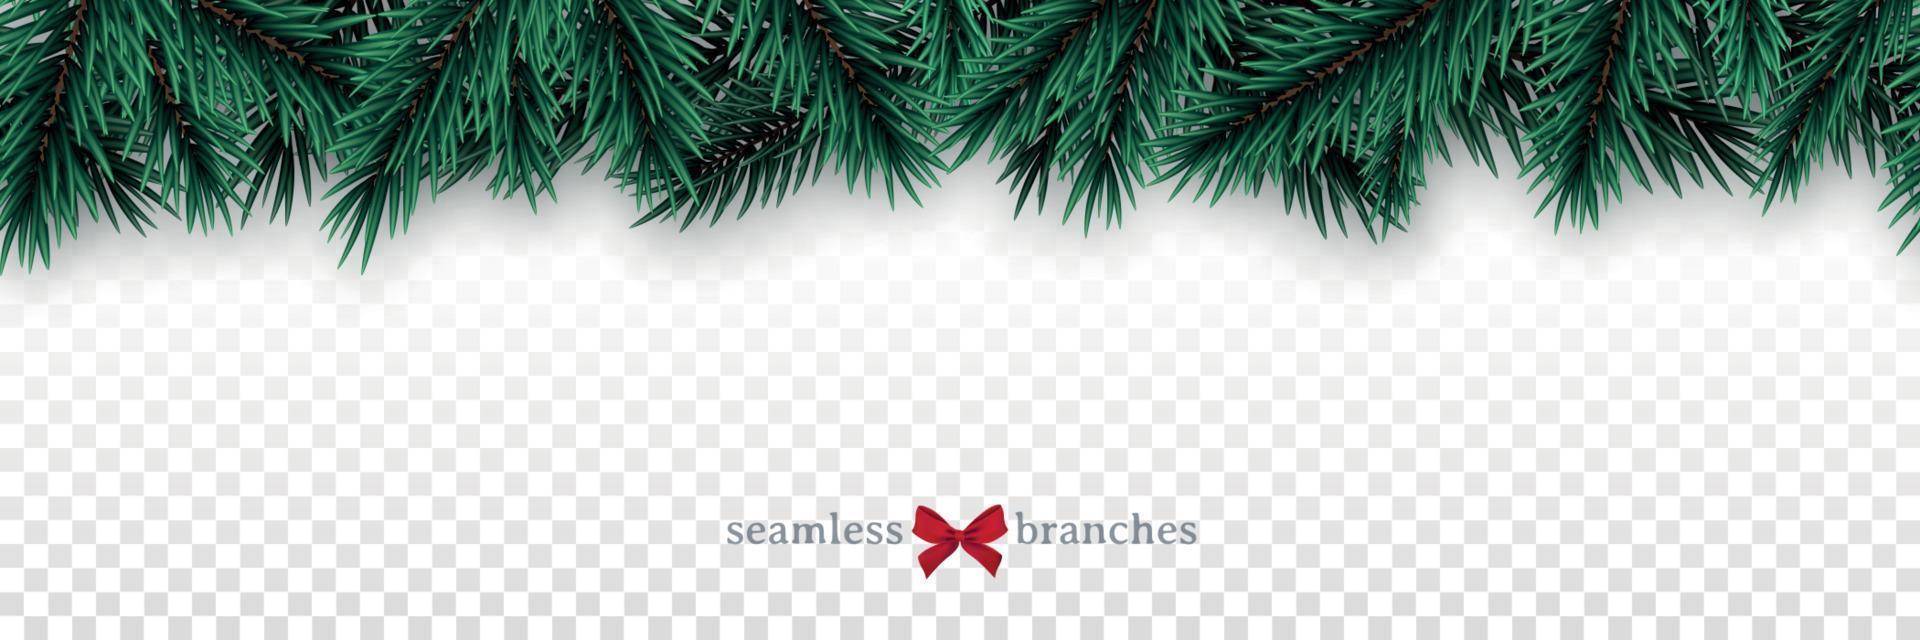 Horizontal border with fir tree branches. vector